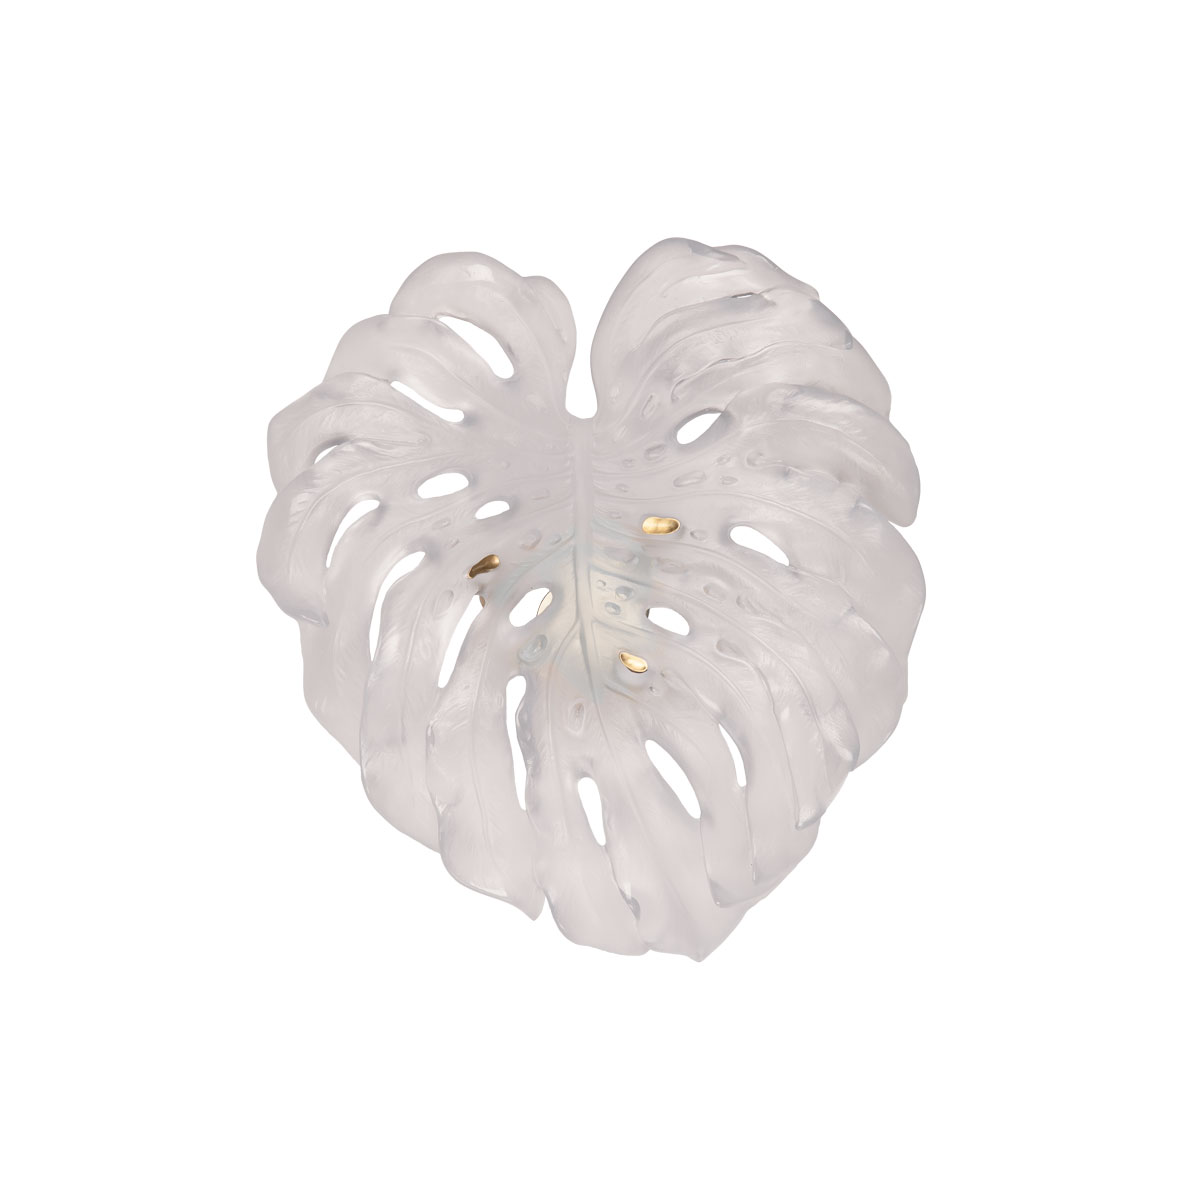 Daum Small Long-Fixture Monstera Wall Leaf in White by Emilio Robba, Sconce